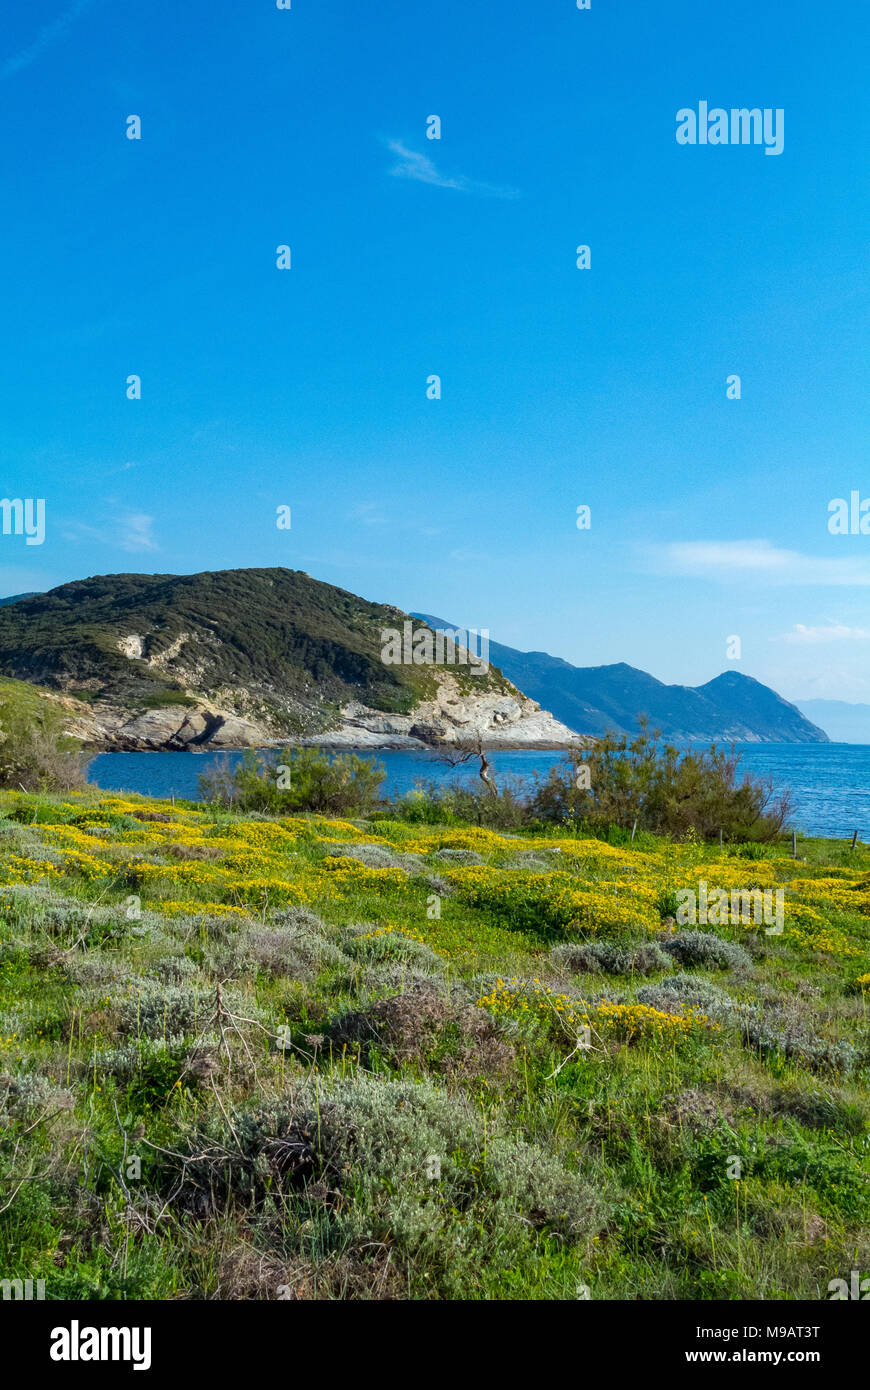 Coastline with spring flowers, corsica, france Stock Photo